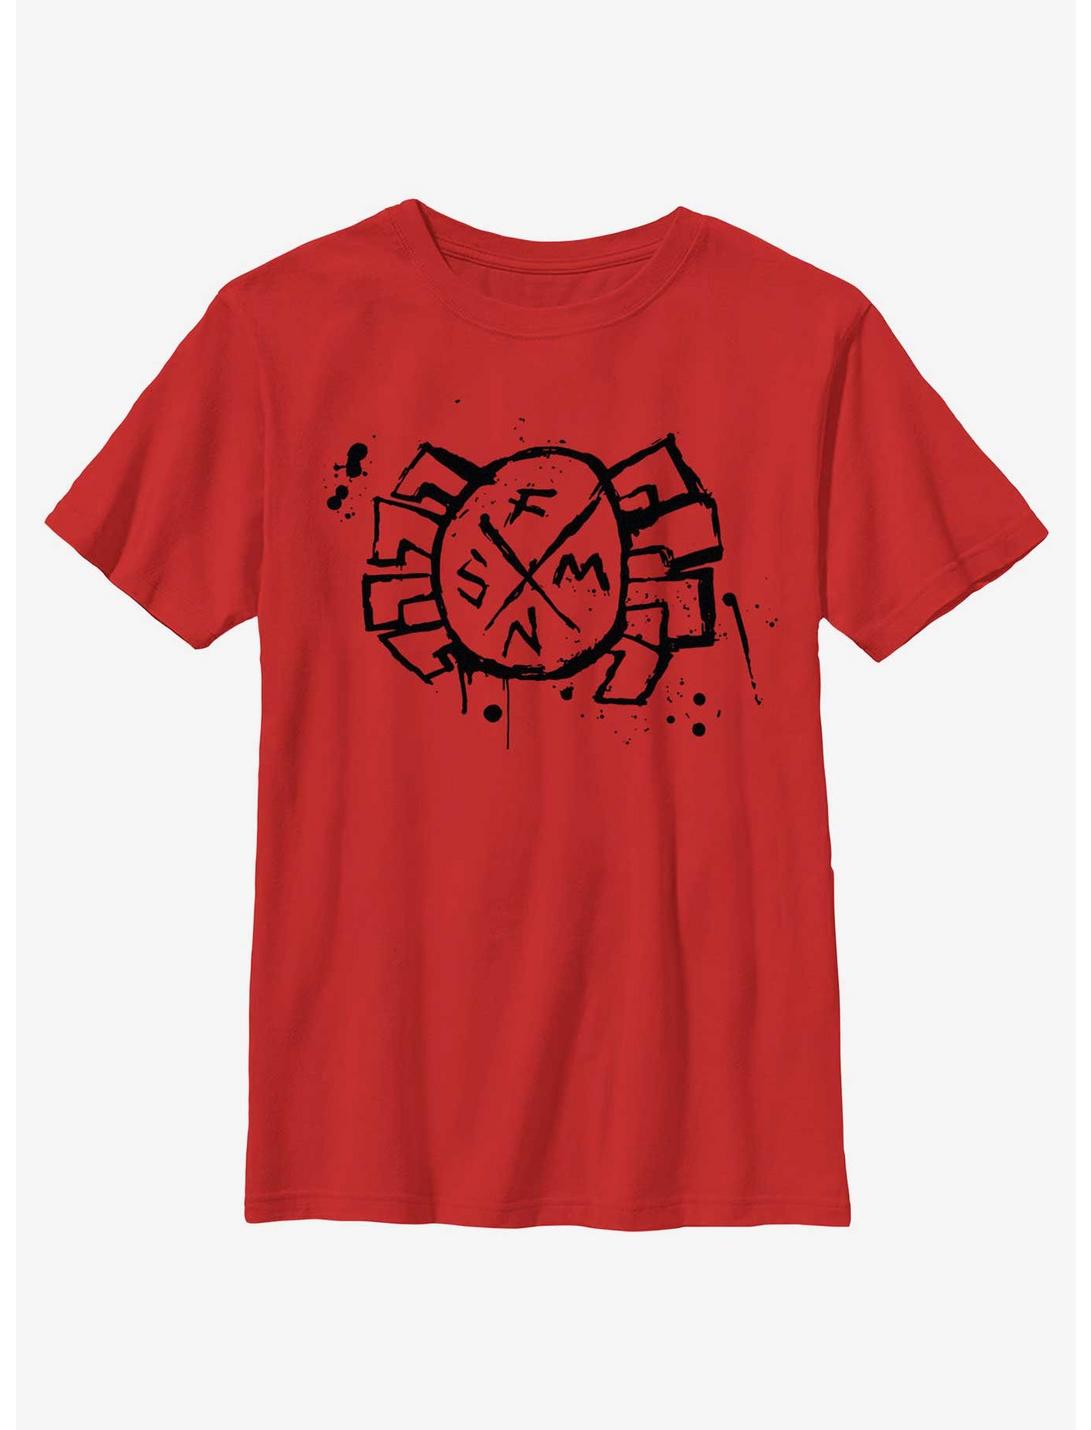 Marvel Spider-Man: Across The Spiderverse Spider-Punk Logo Youth T-Shirt, RED, hi-res